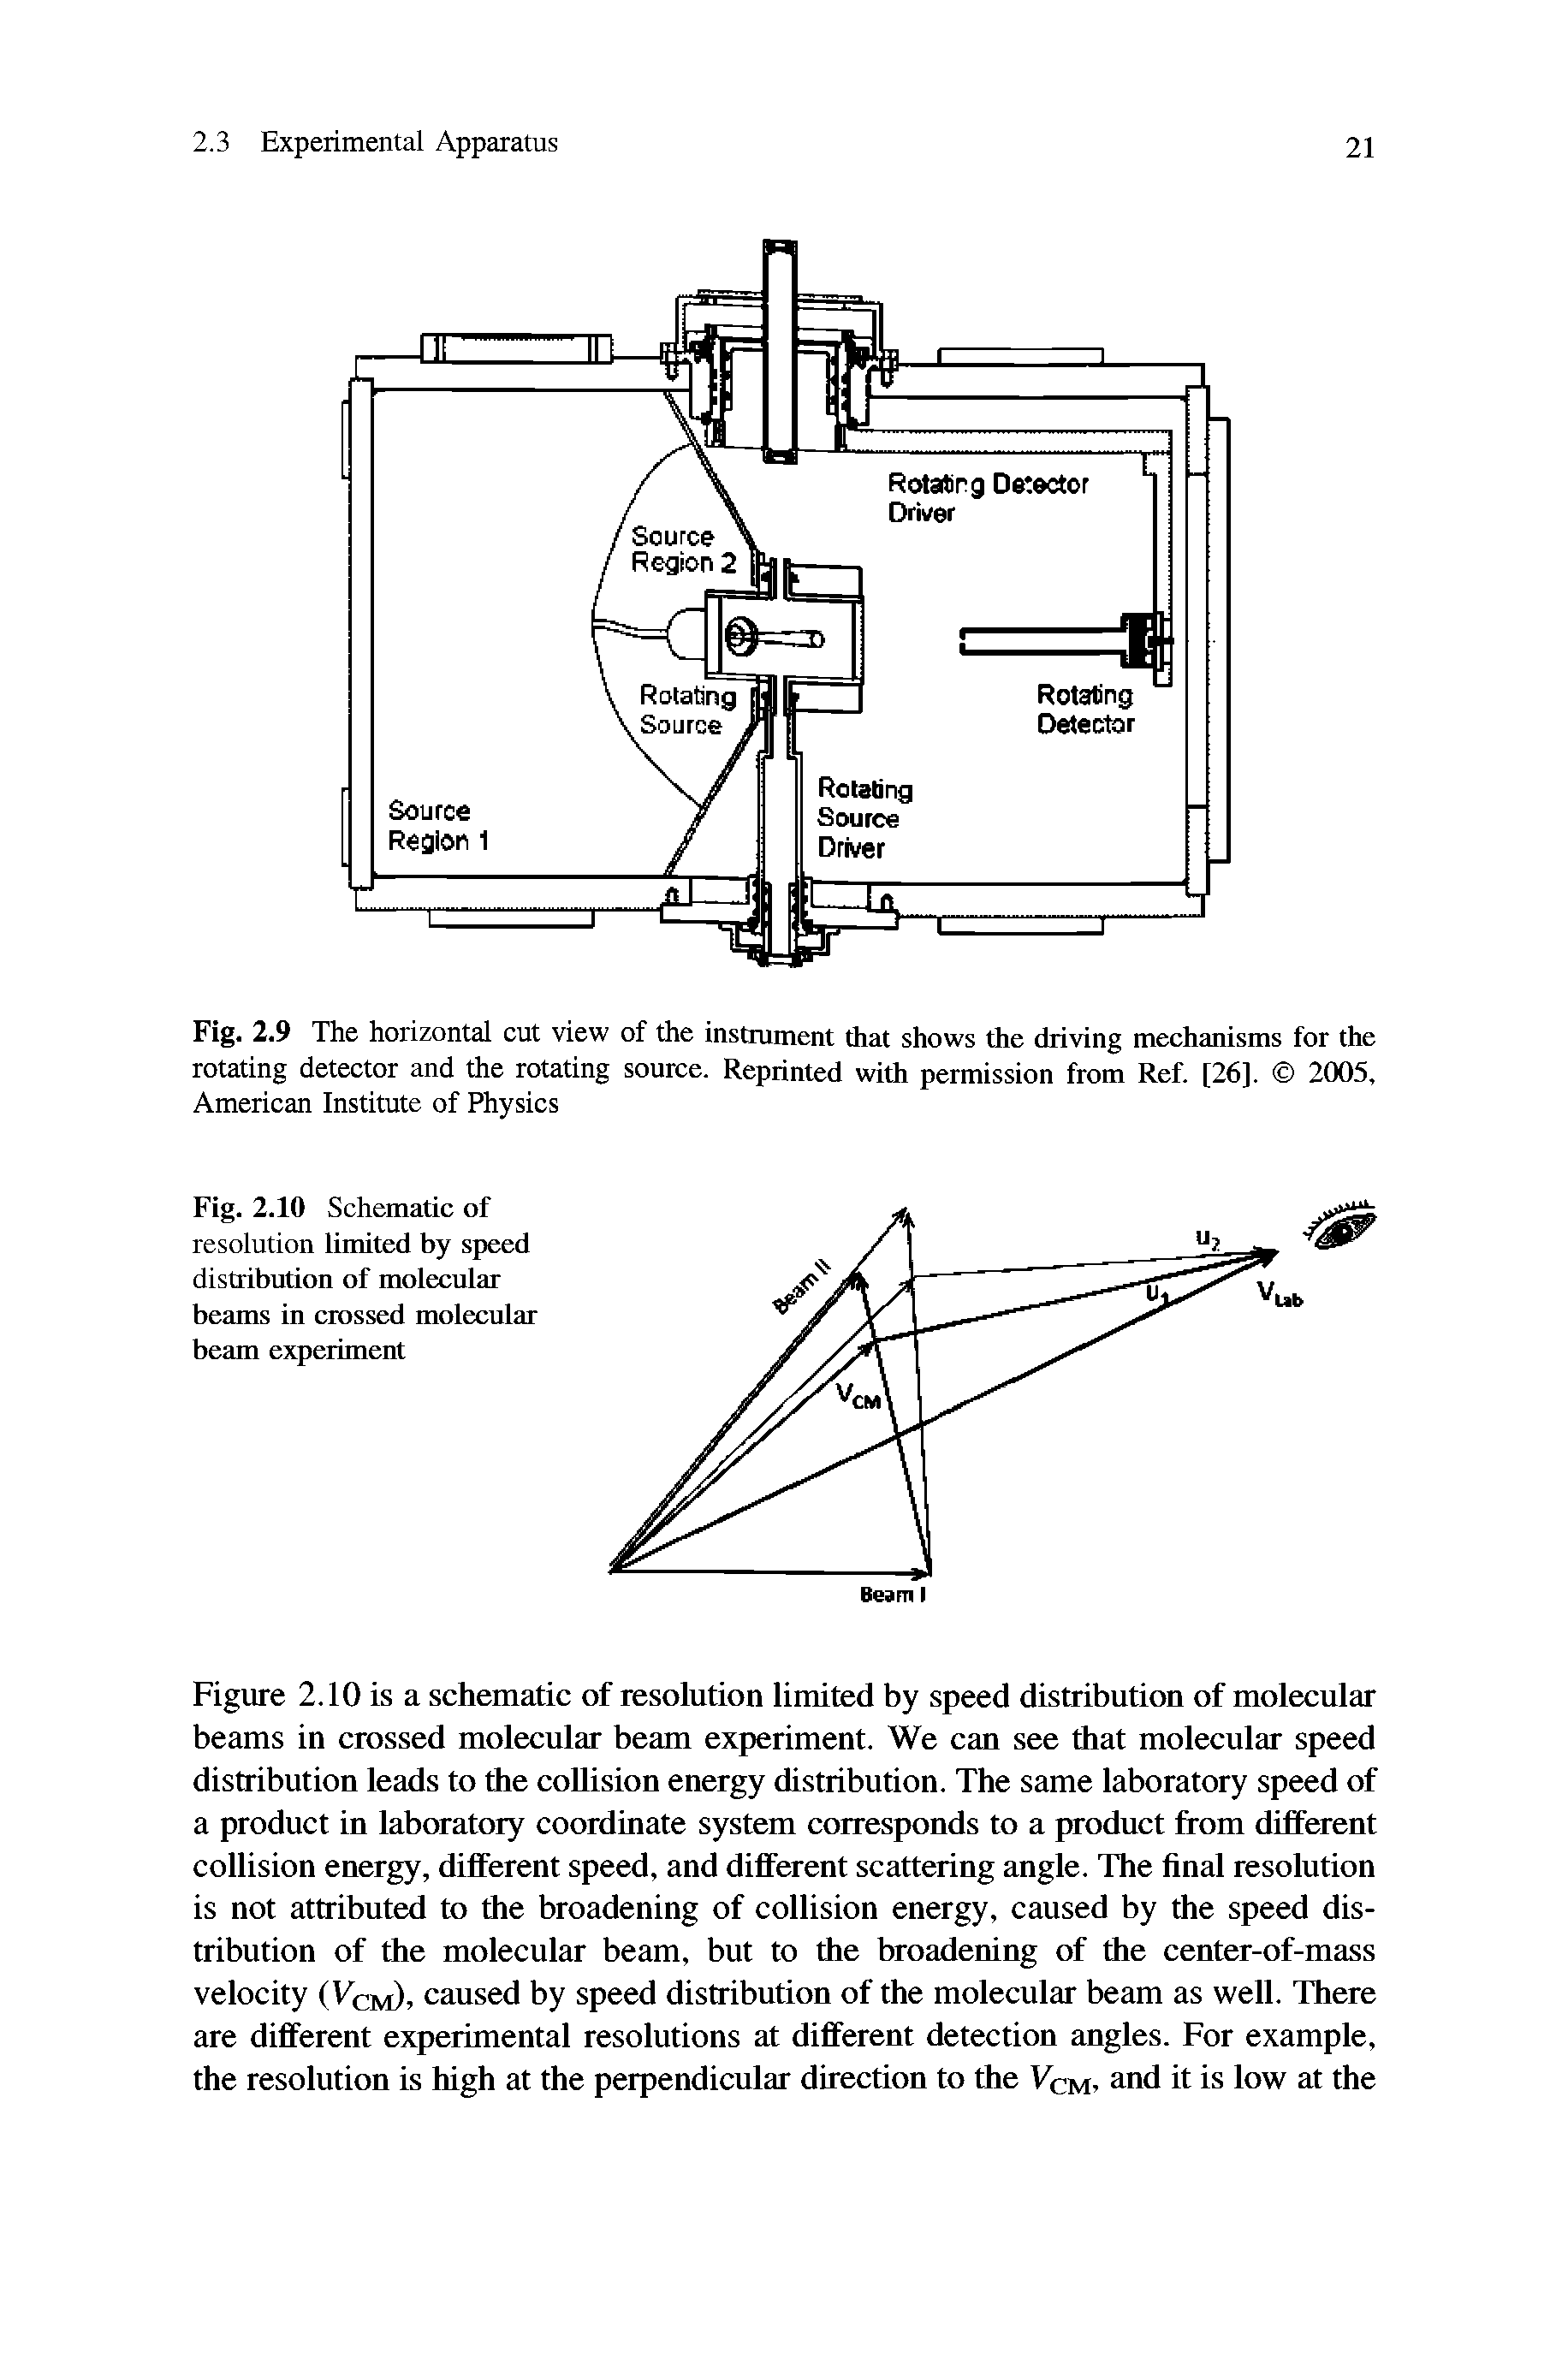 Fig. 2.9 The horizontal cut view of the instrument that shows the driving mechanisms for the rotating detector and the rotating source. Reprinted with permission from Ref. [26]. 2005, American Institute of Physics...